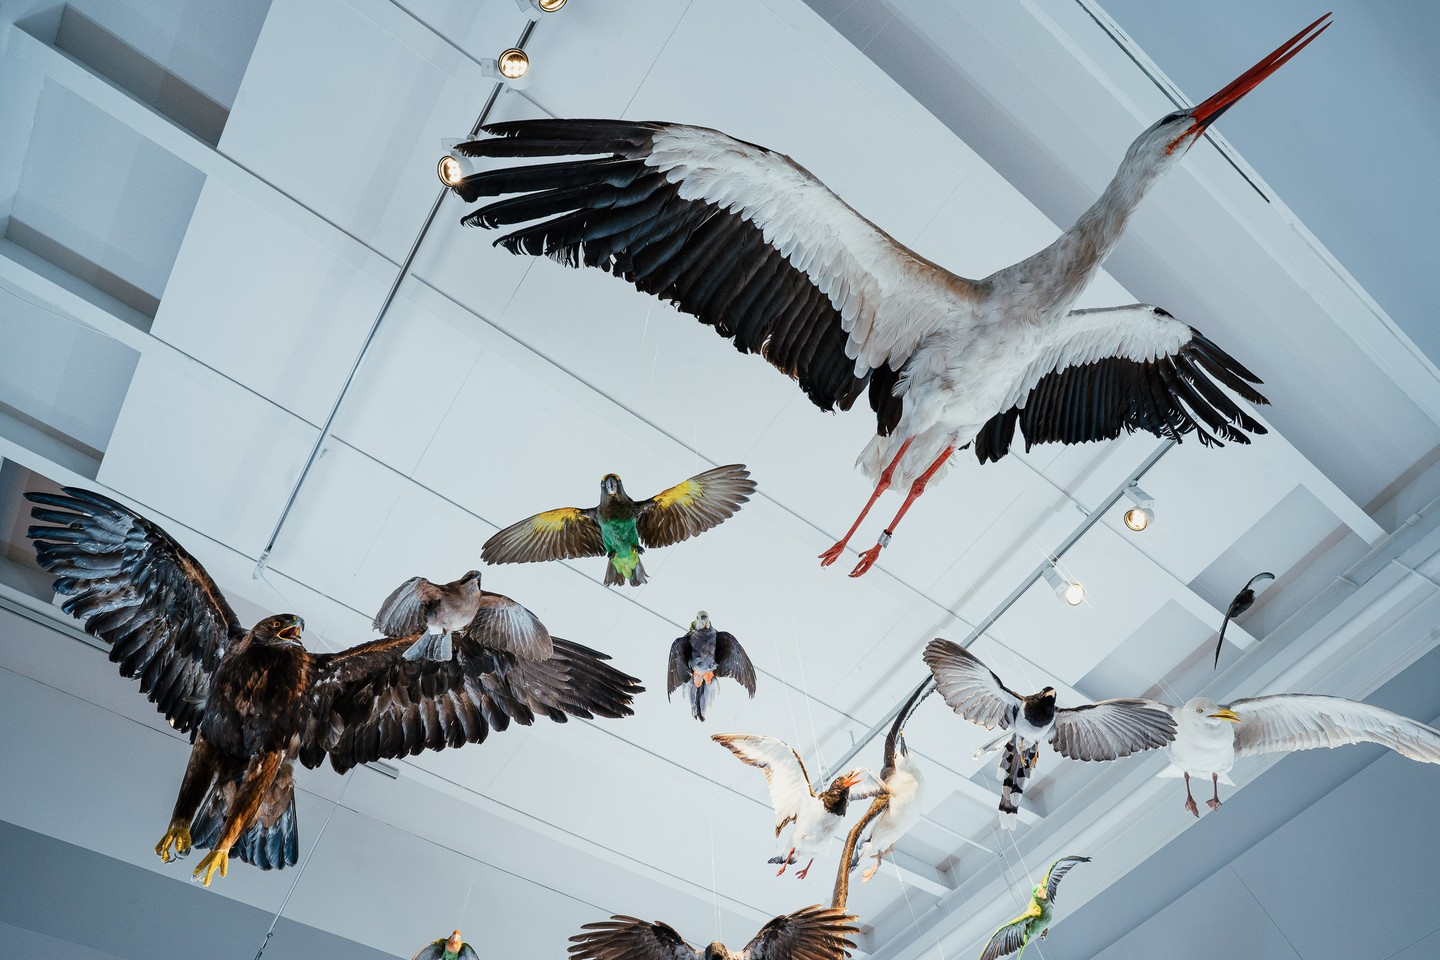 Birds under the scope at the Natural History Museum of Denmark